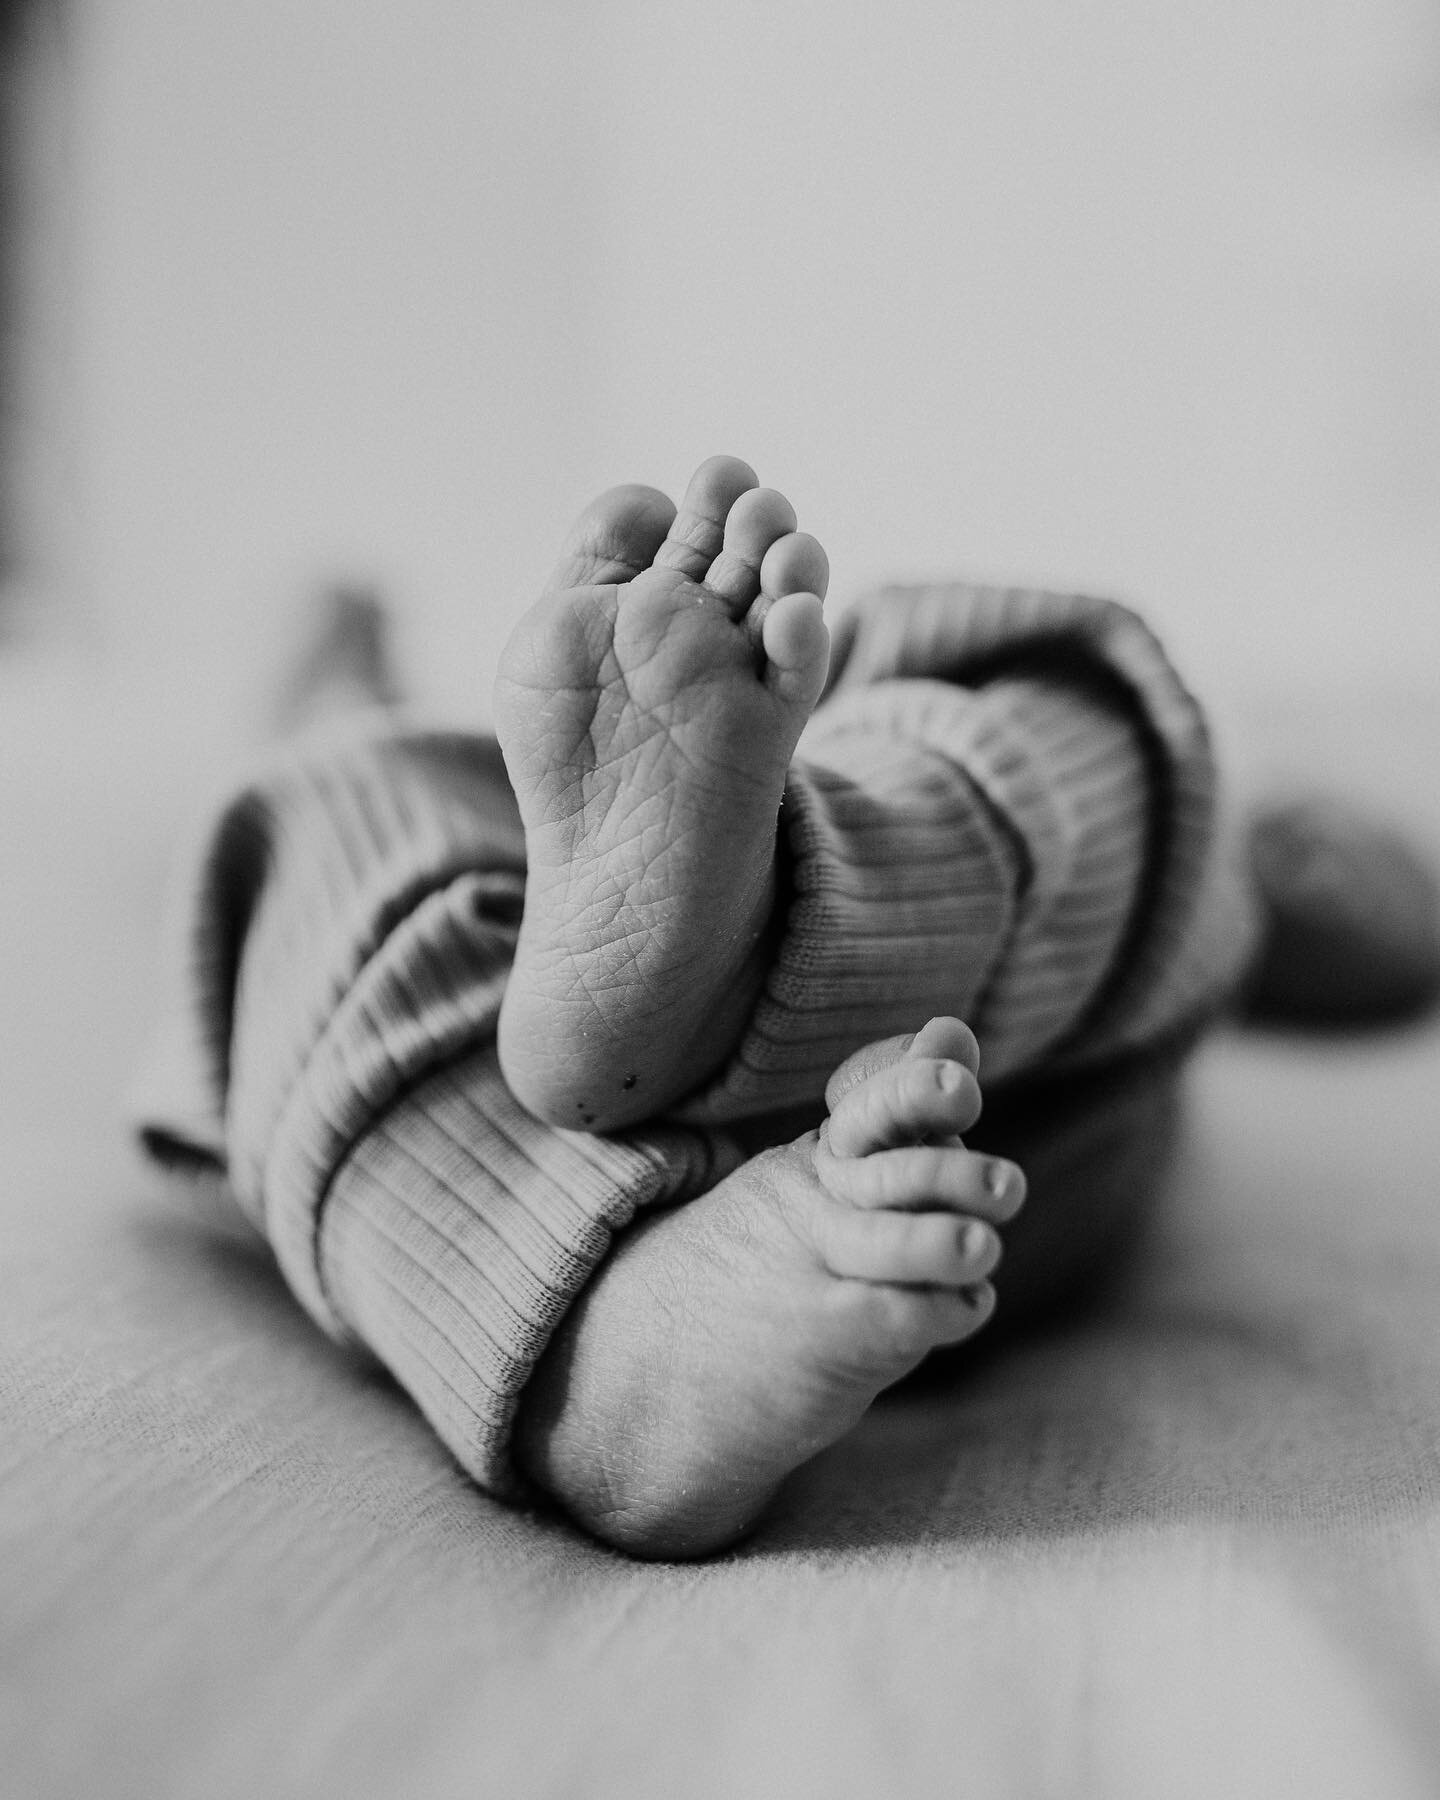 It never gets old. I could look at tiny wrinkly baby feet all day long 

&bull; &bull; &bull;

#newborn #inhomesession #inhomenewbornsession #inhomenewbornphotographer #newbornsession #ohionewbornphotographer #columbusnewbornphotographer #lifestyleph